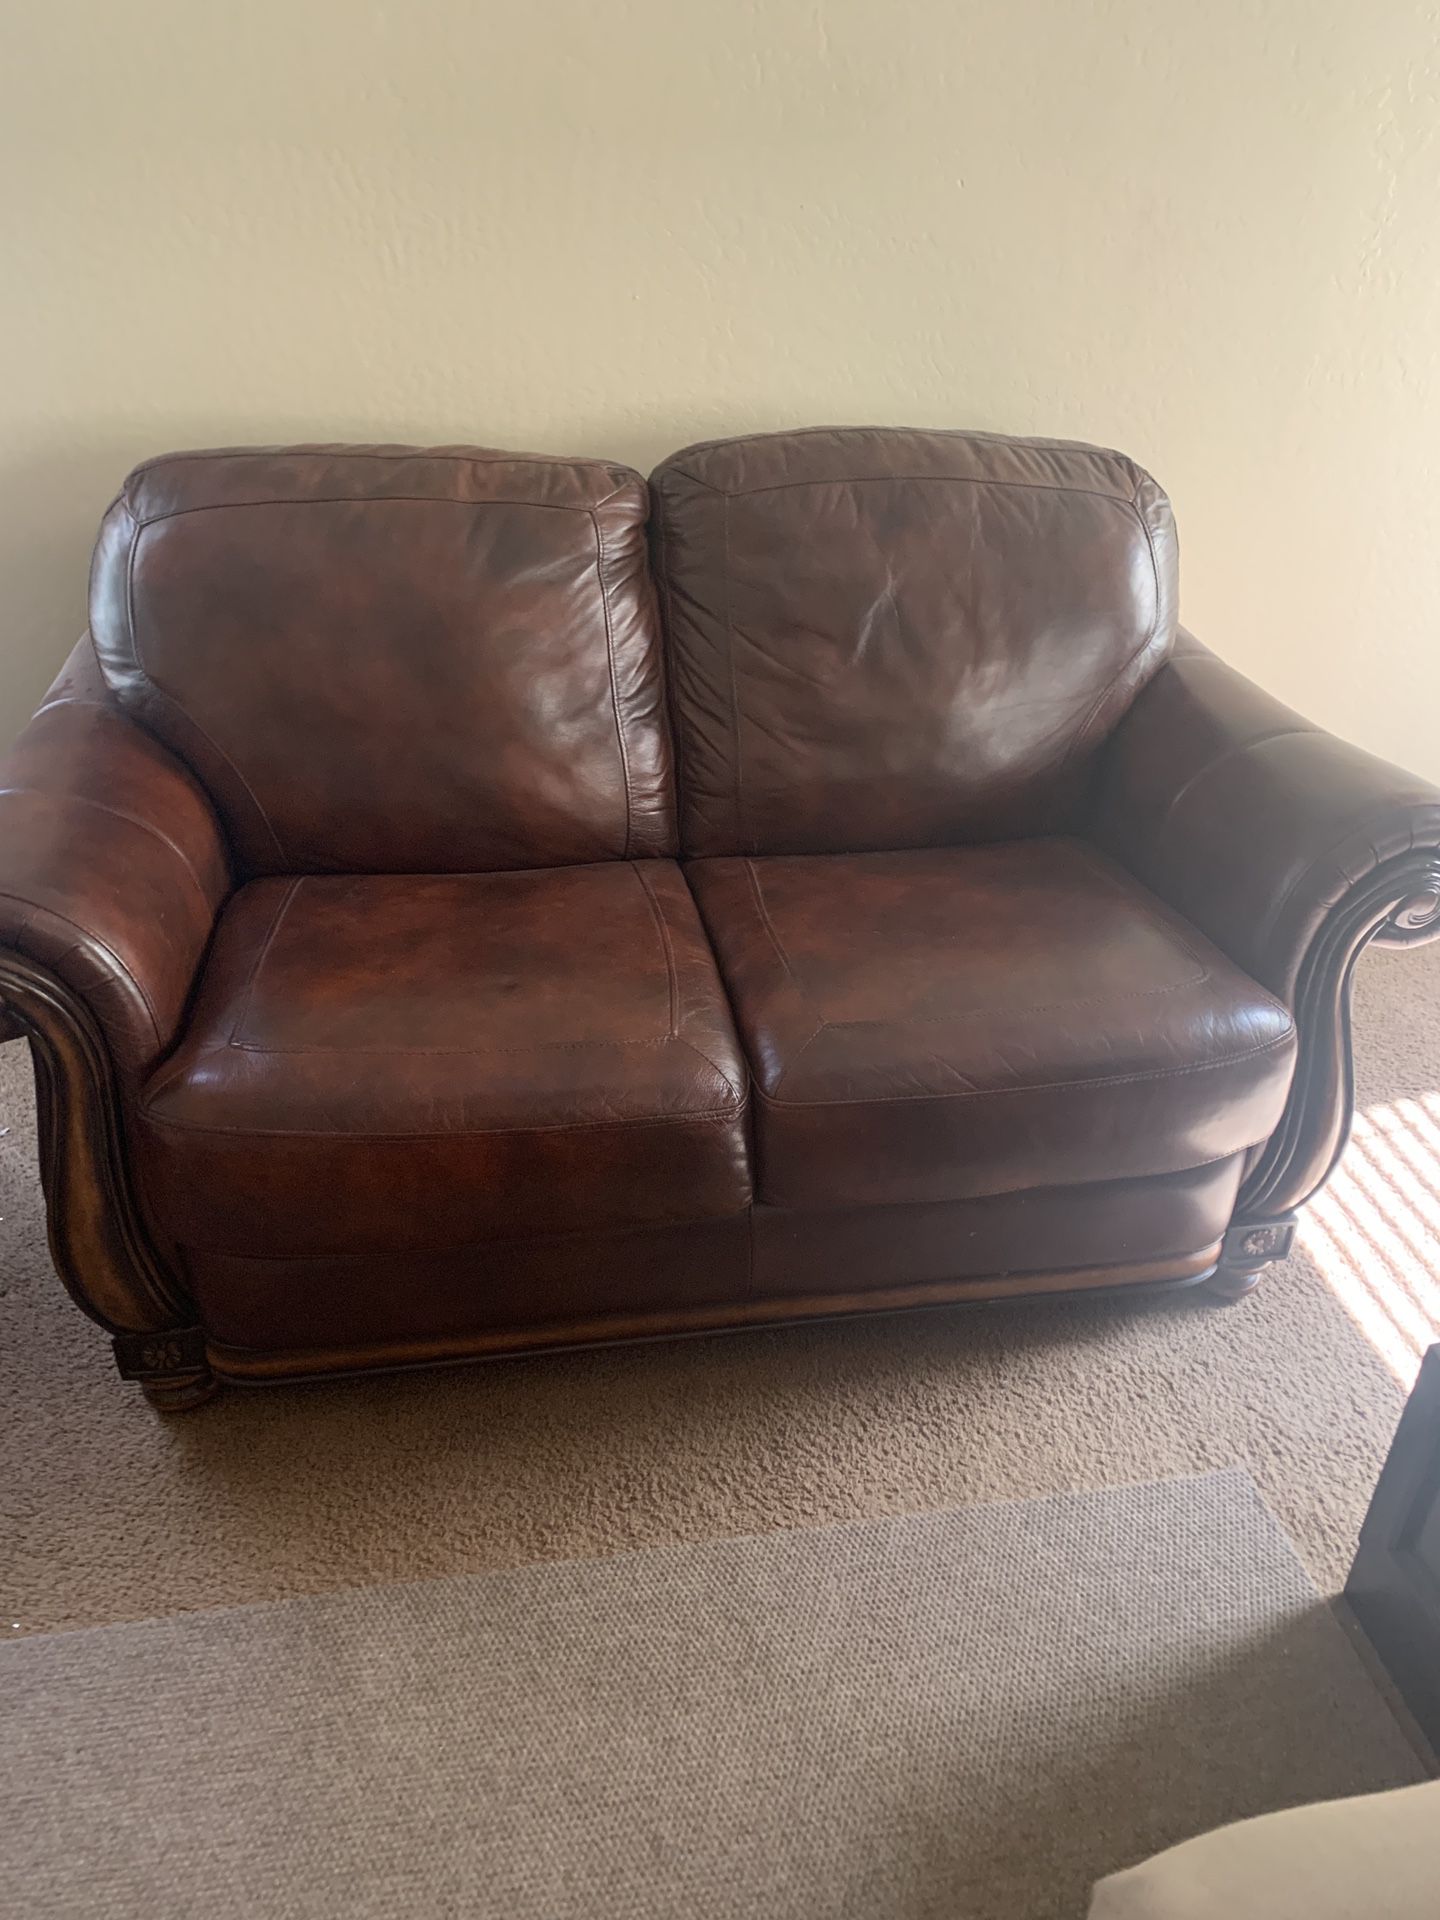 Leather Loveseat And Chair ($150)